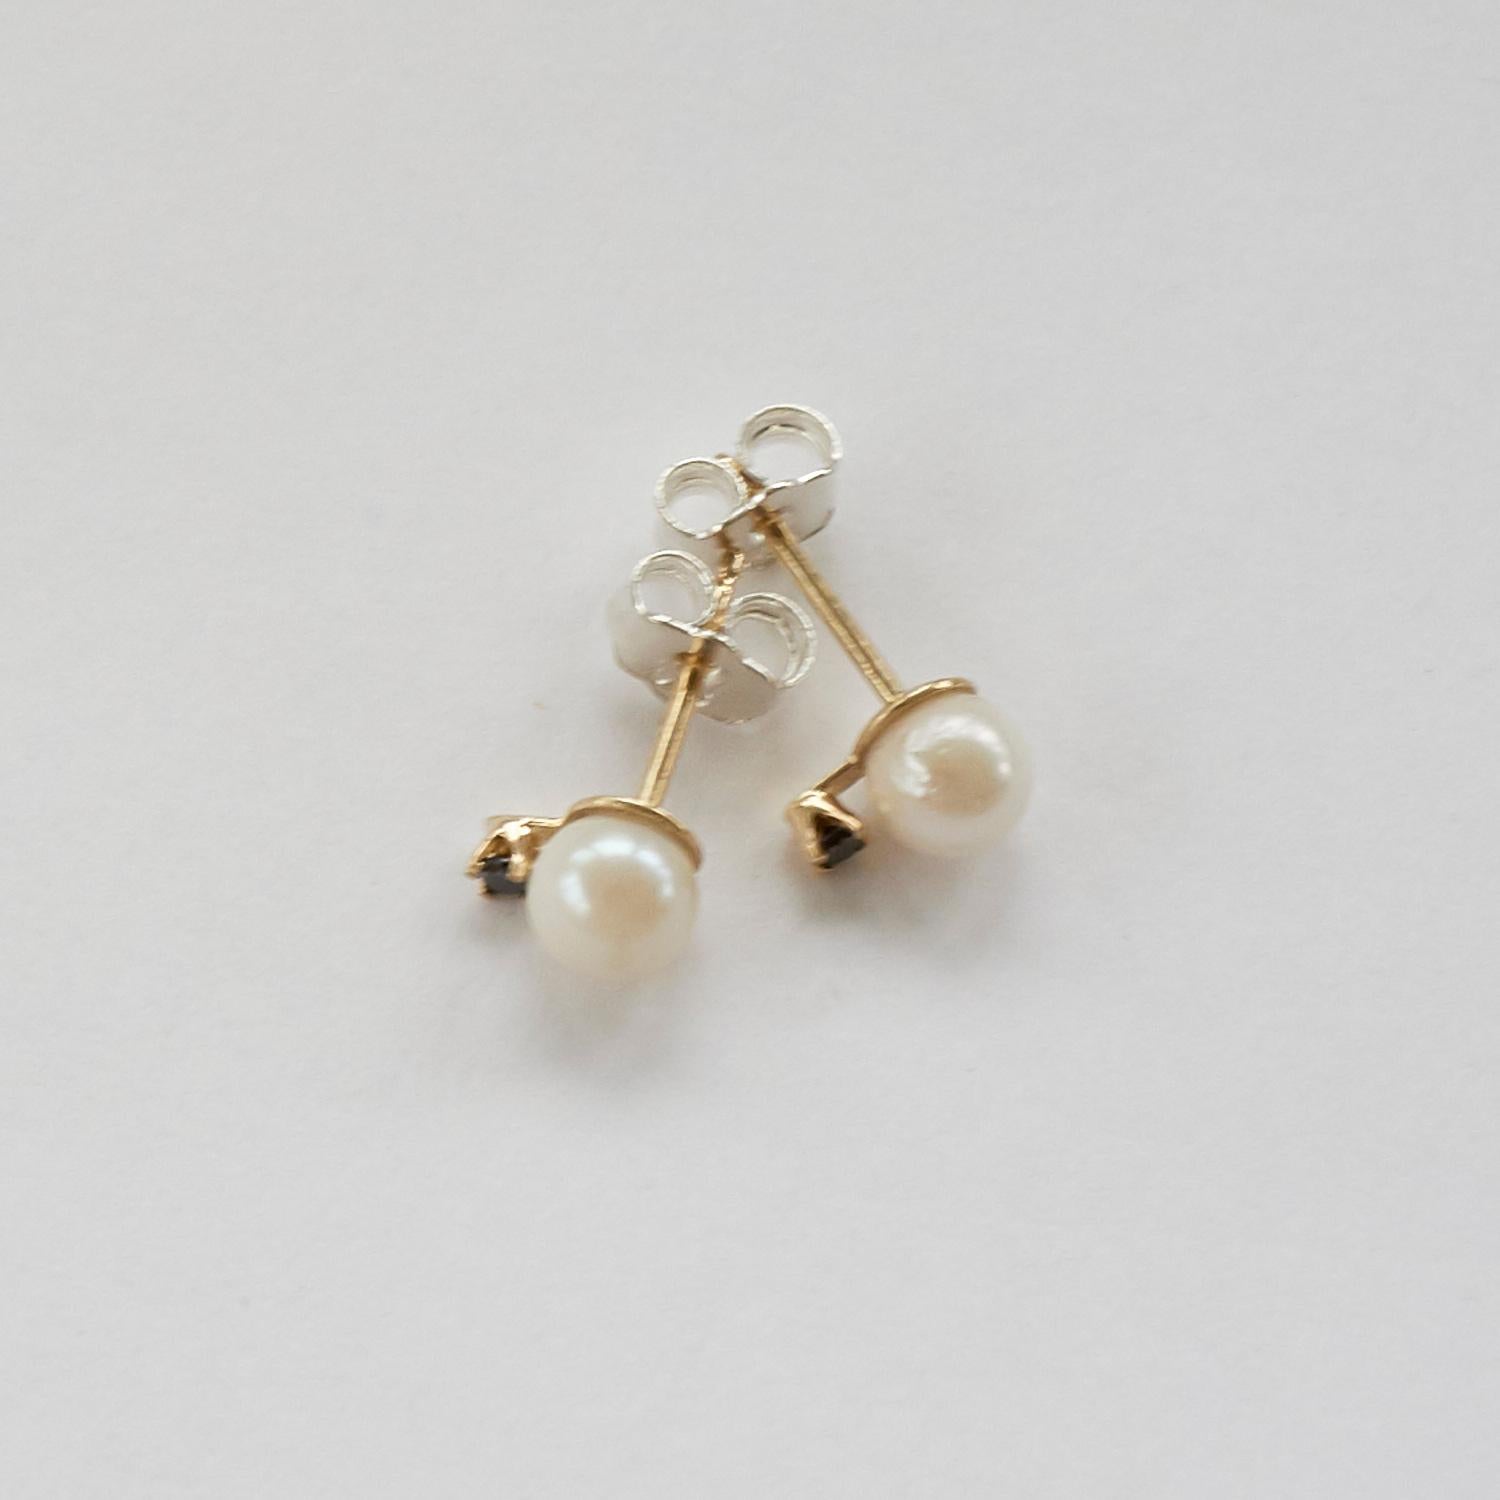 Contemporary White Pearl Black Diamond Earring Stud Gold J Dauphin For Sale